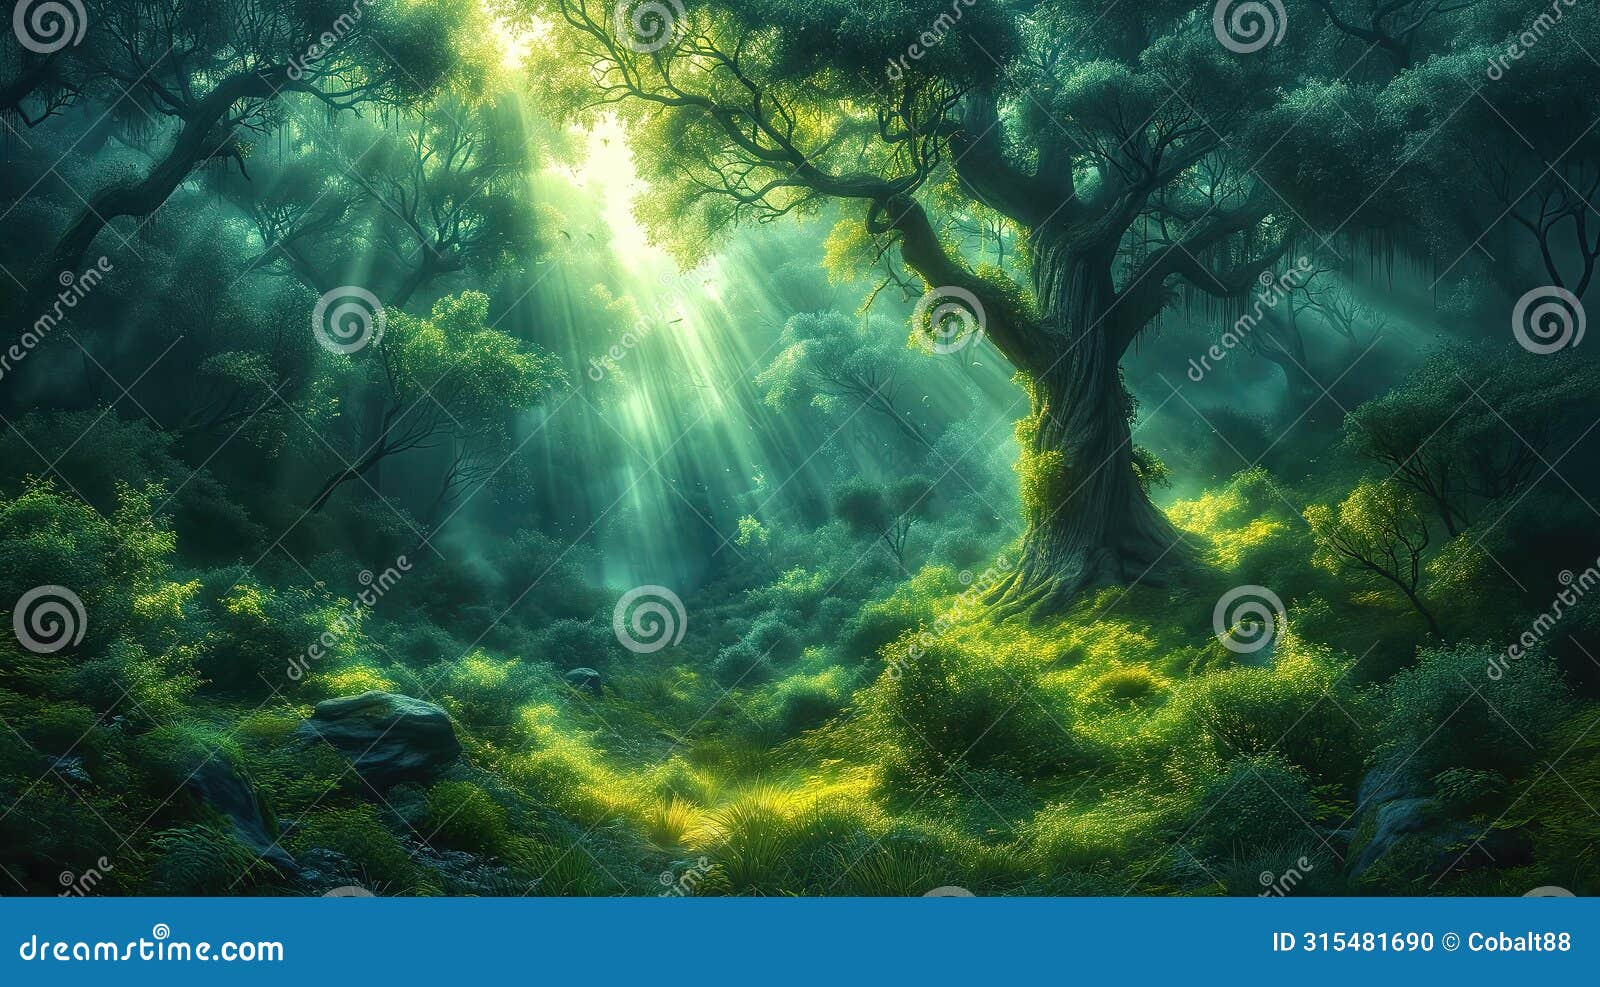 fantastic forest with giant trees, atmospheric and fairy-tale landscape